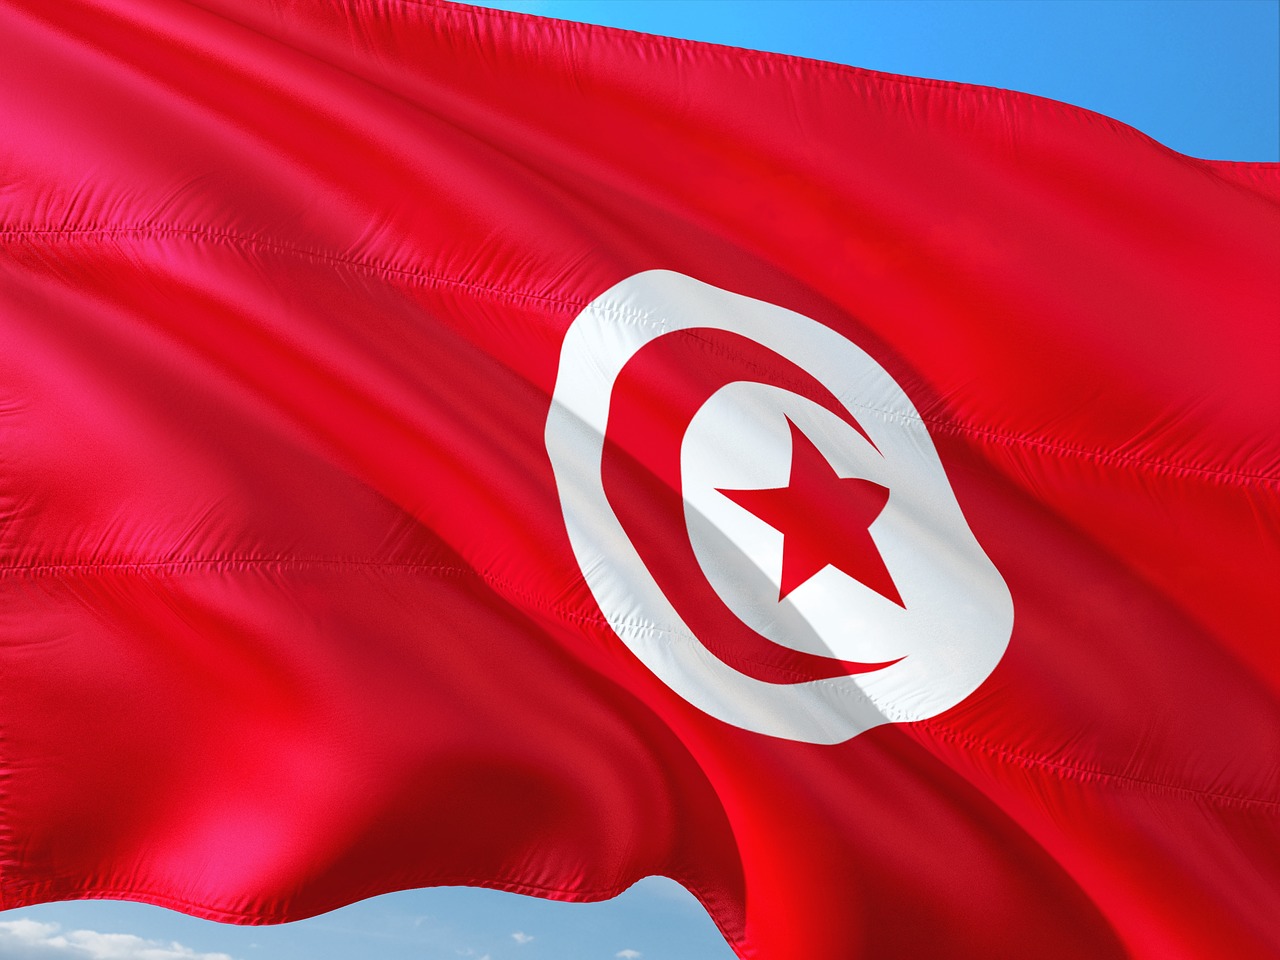 Tunisia union announces release of official following arrest and political tensions